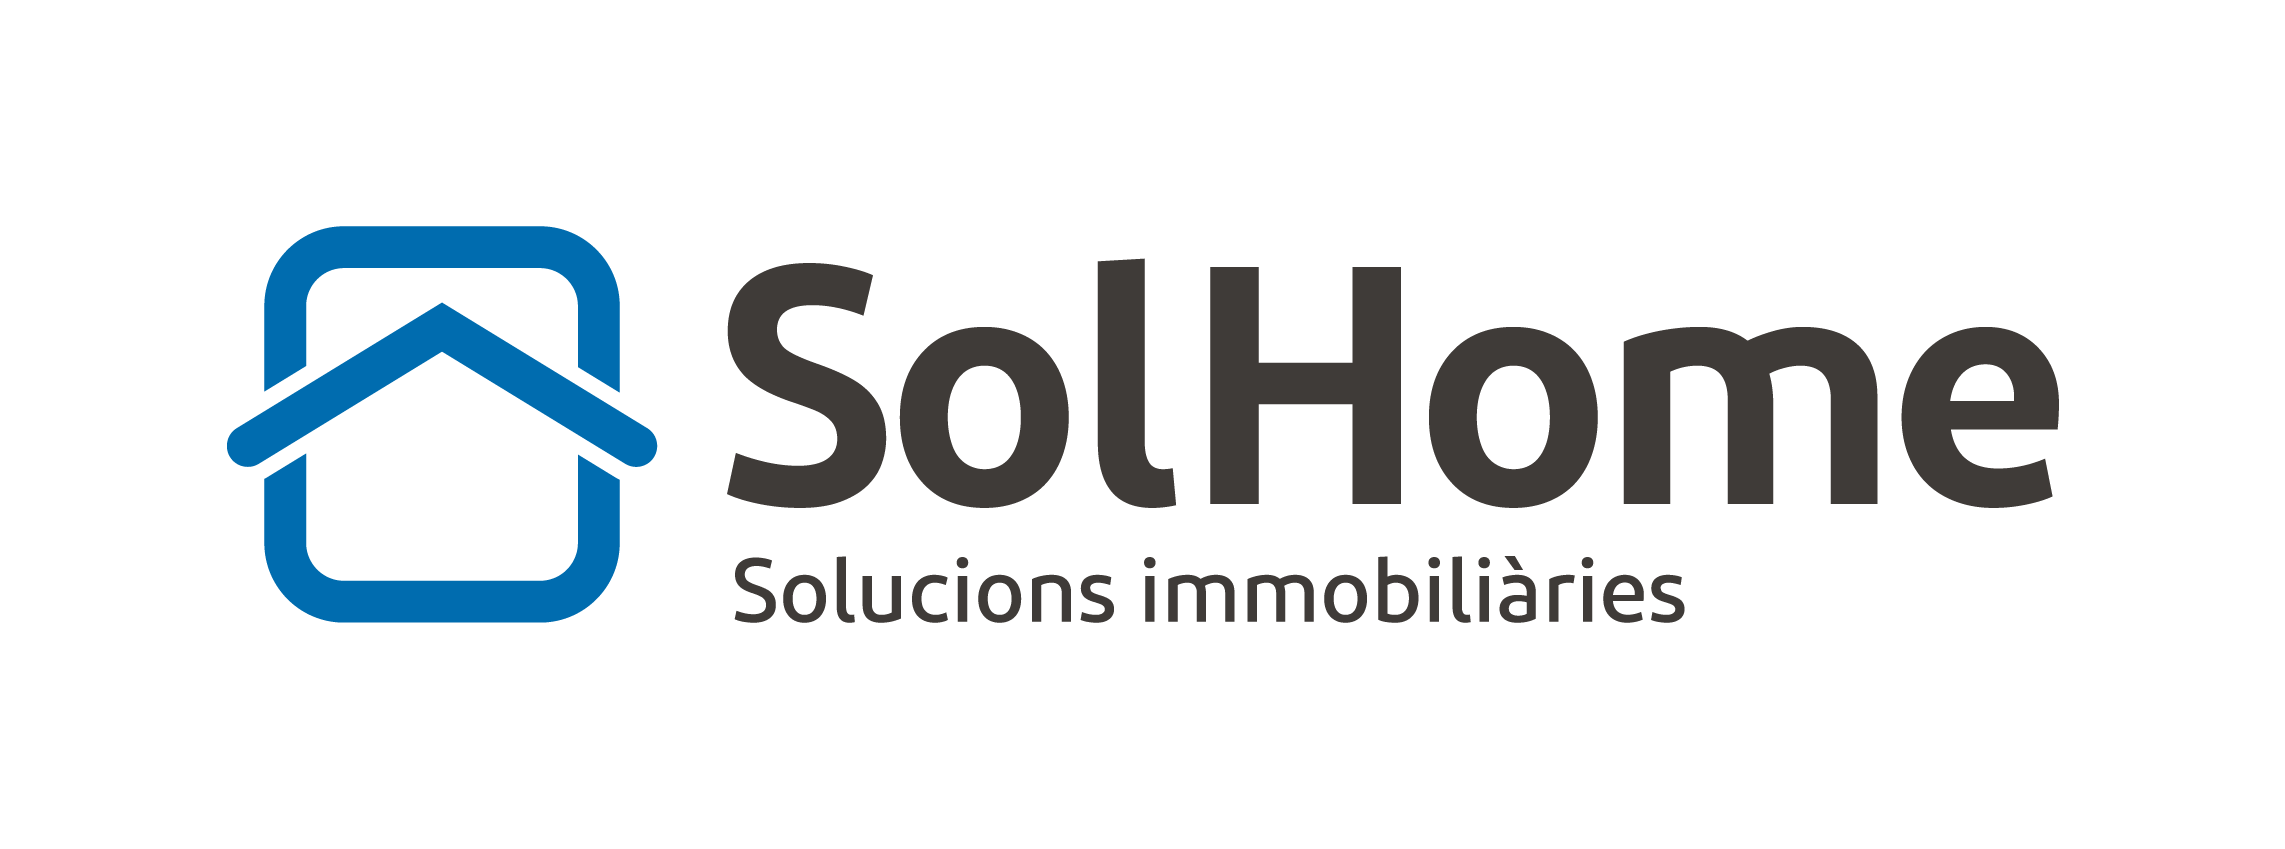 SOLHOME